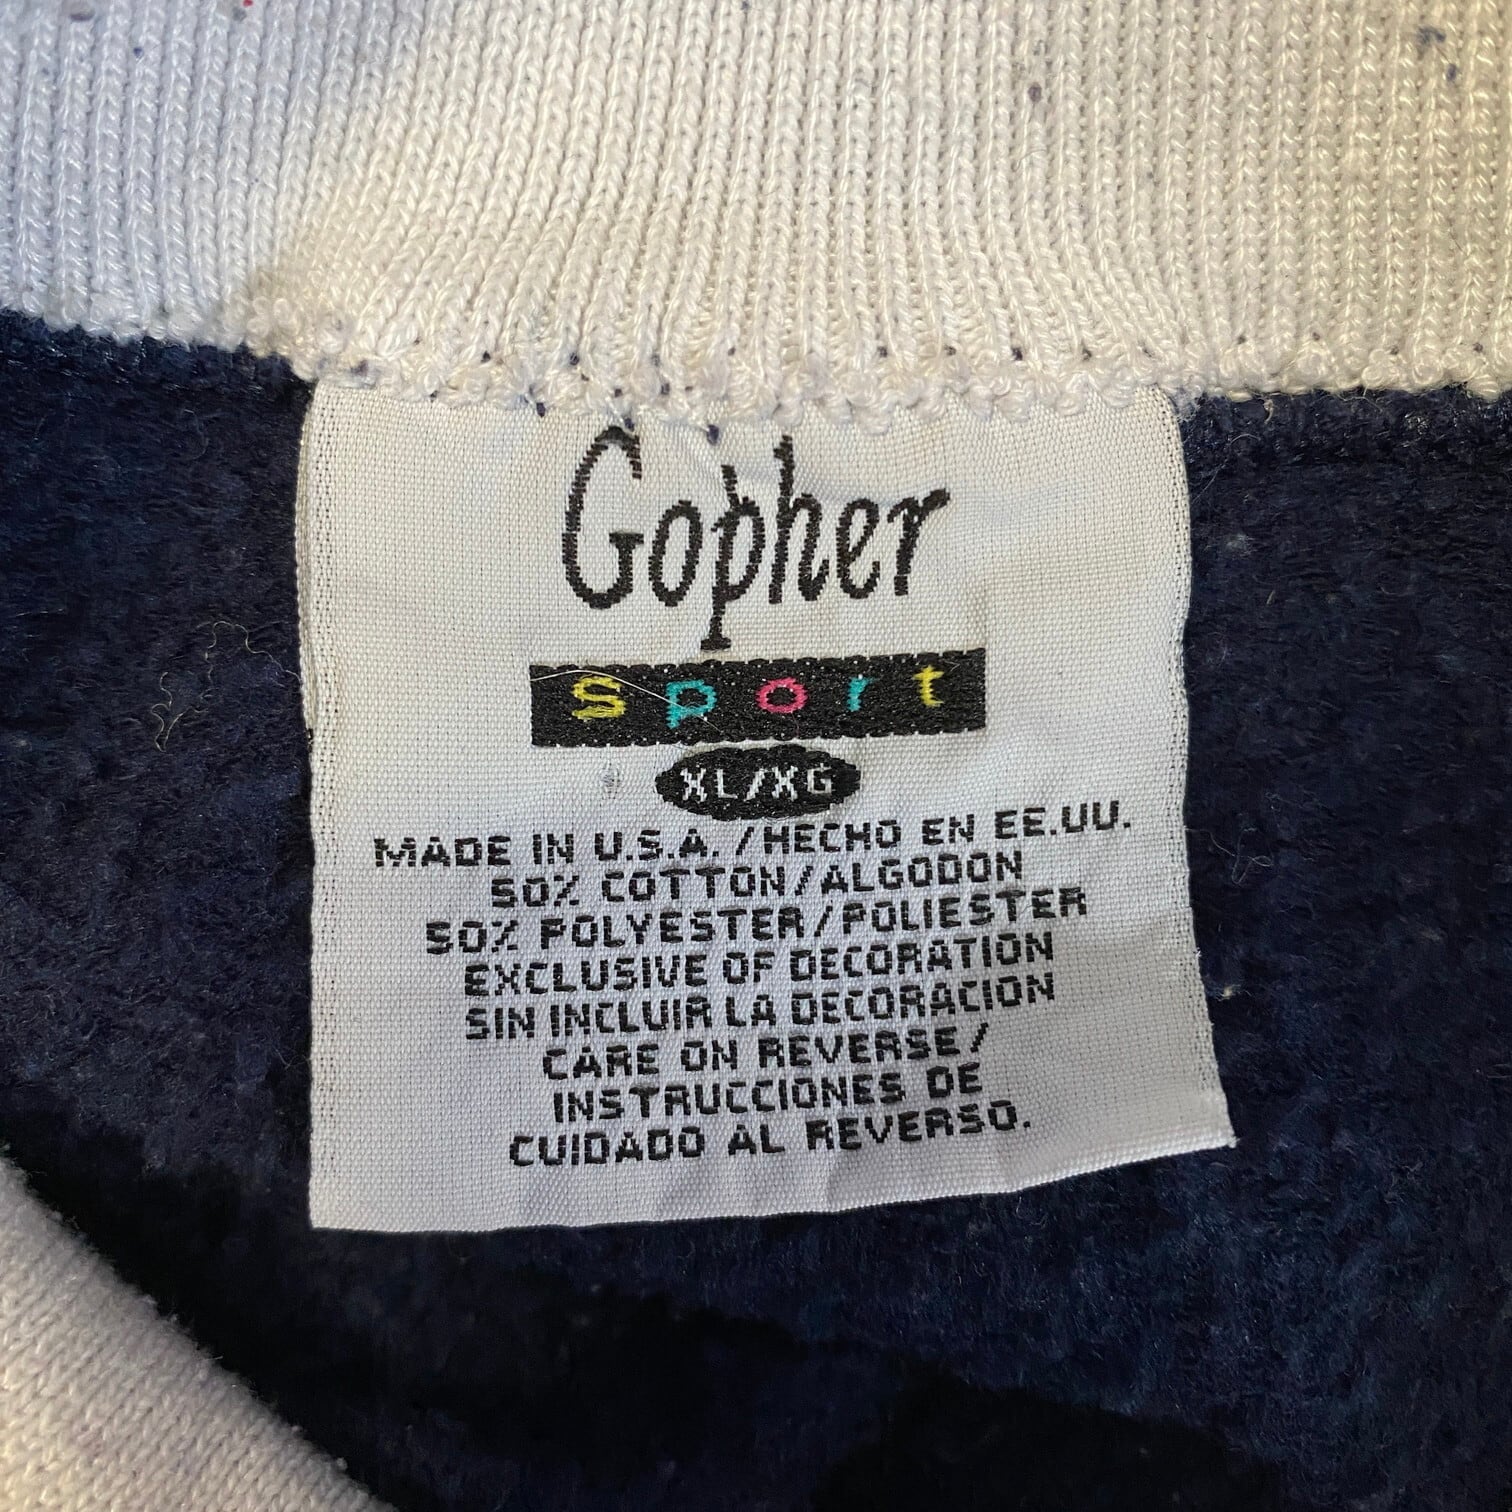 USA製 90年代 Gopher Sports プリント 襟付きスウェット